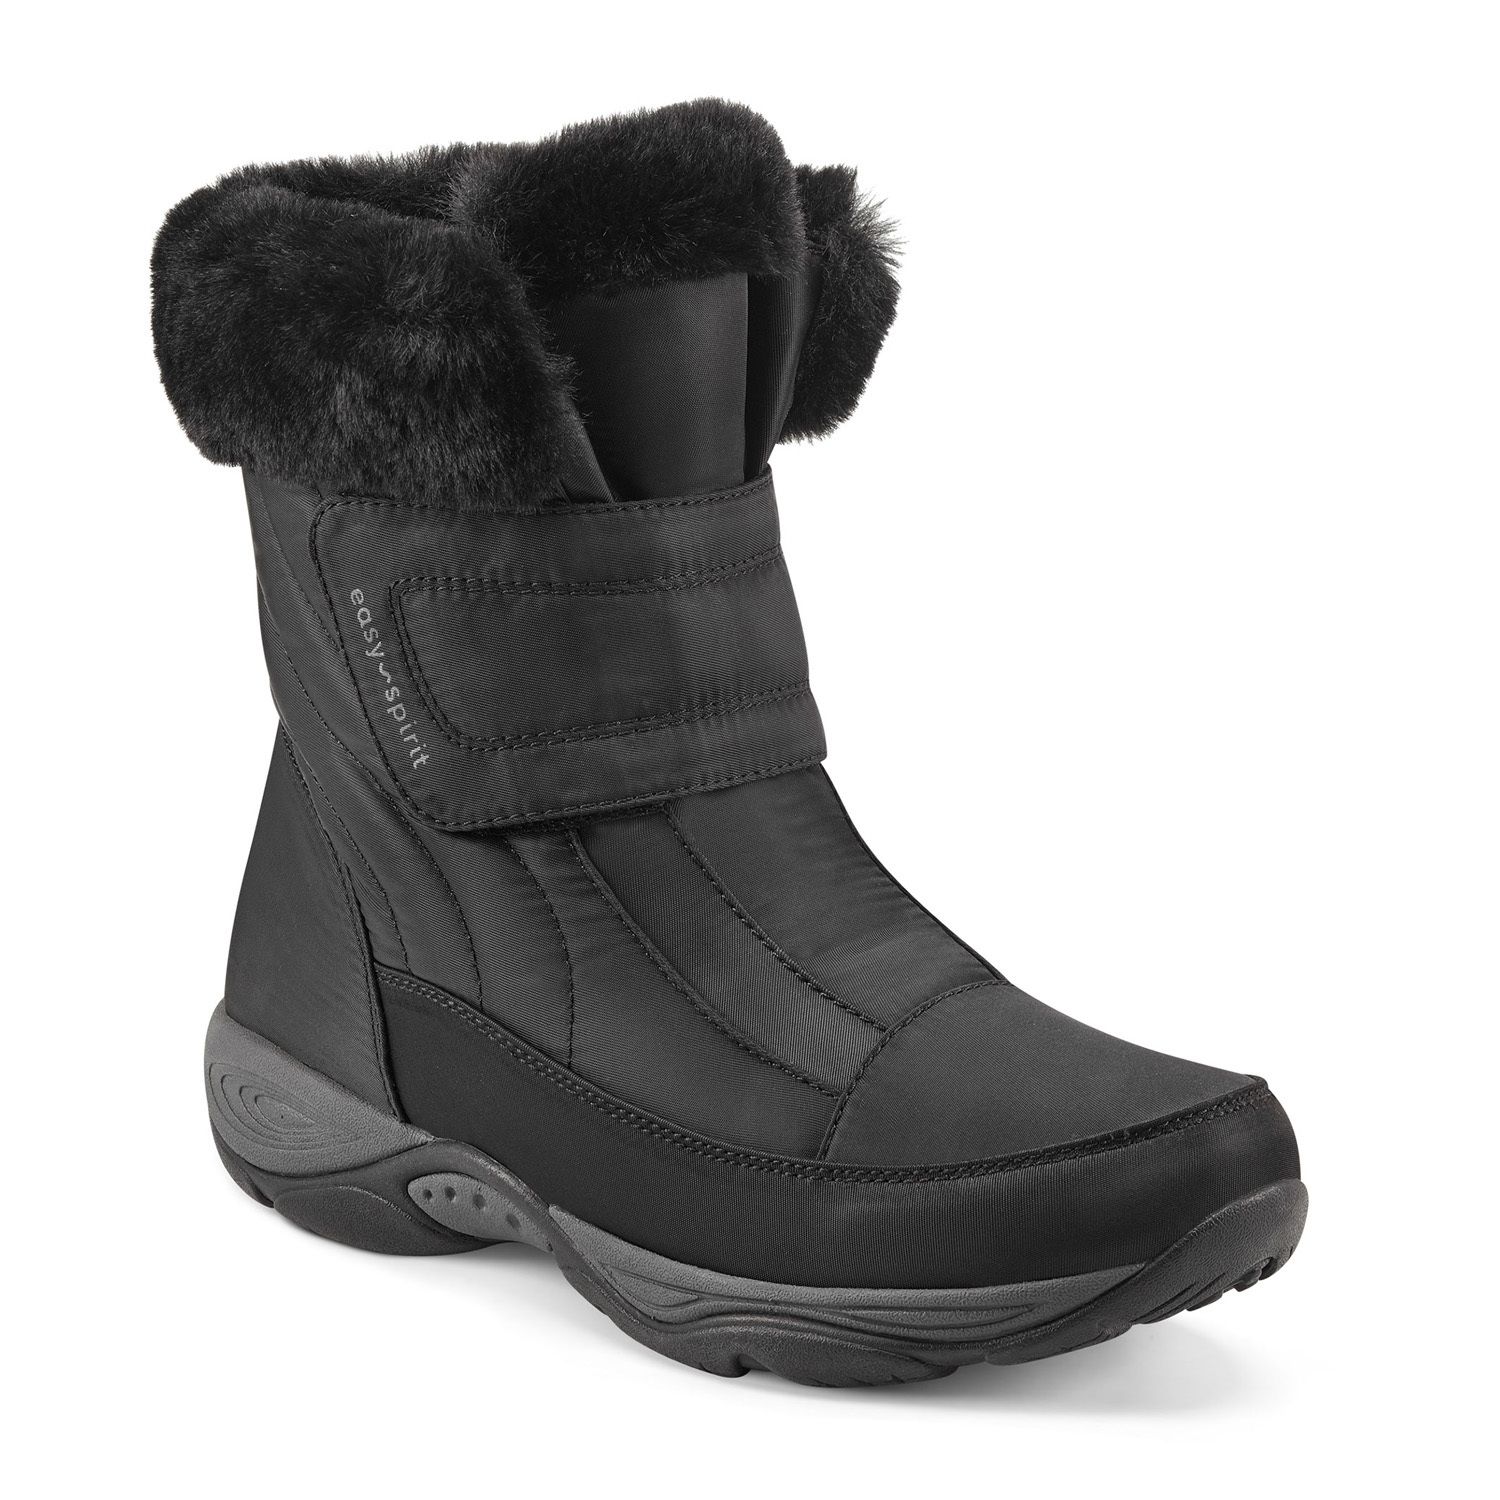 Image for Easy Spirit Eminee Women's Water Resistant Winter Boots at Kohl's.